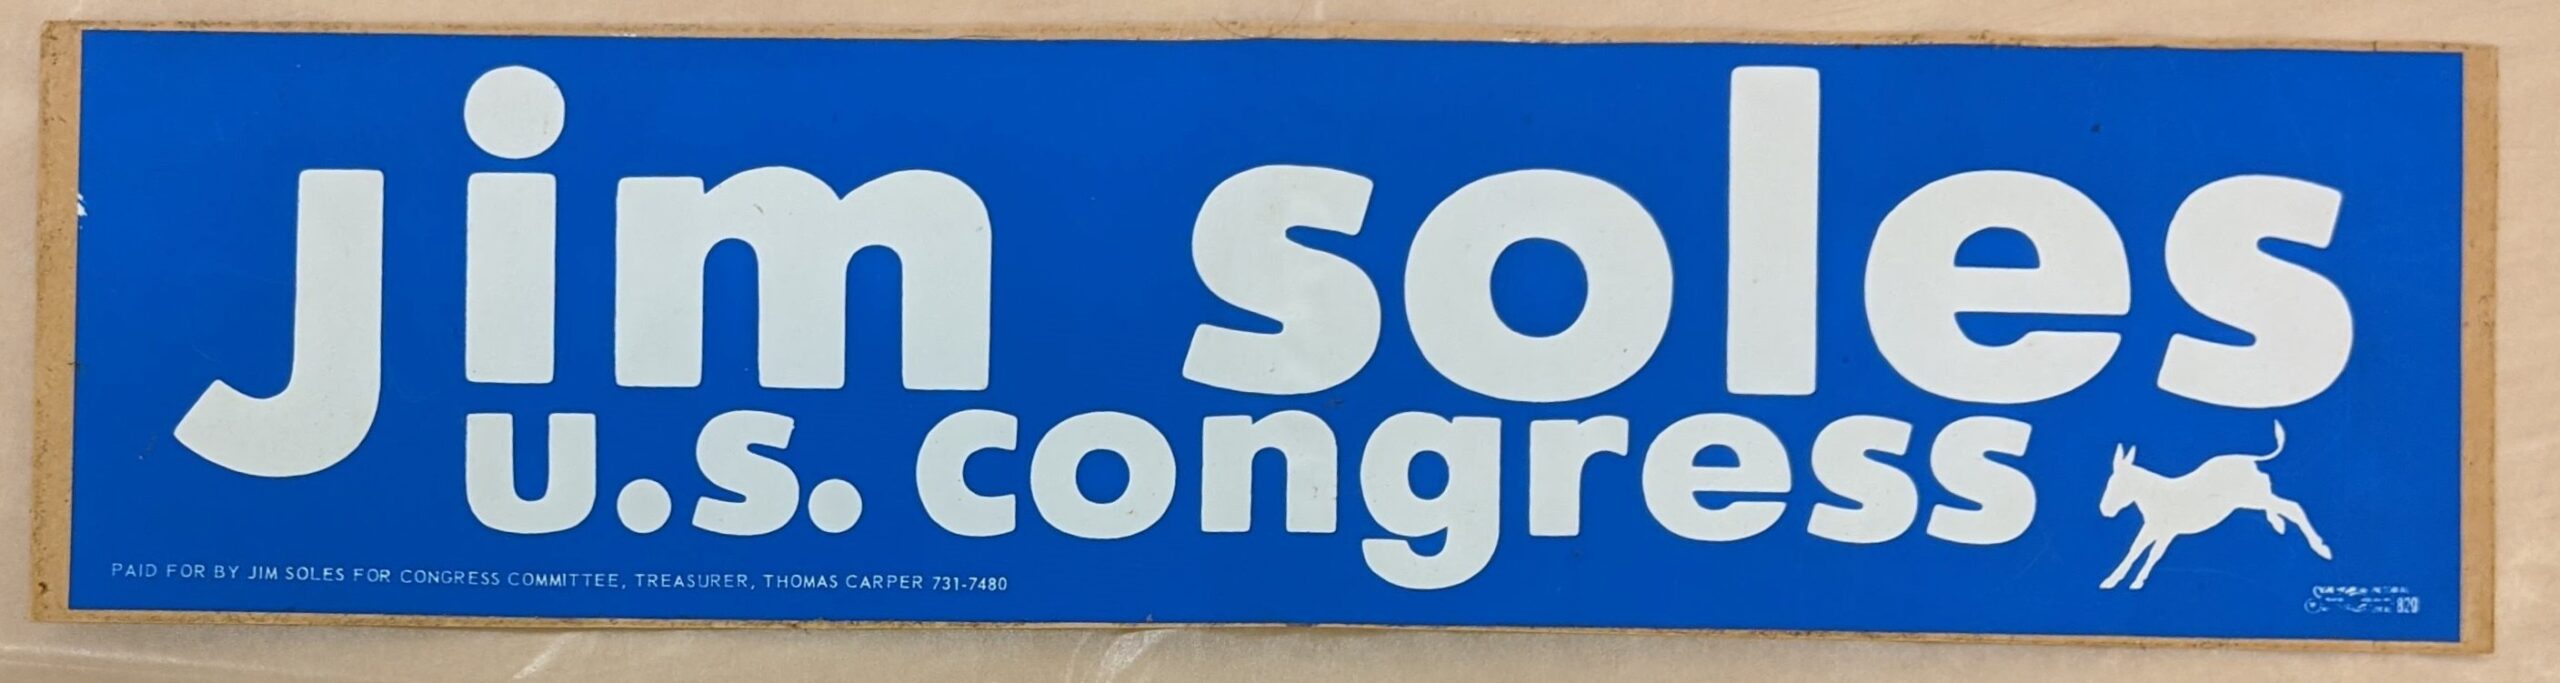 Creator unknown, “Jim Soles, U.S. Congress” bumper sticker, 1974, from the Jerome O. Herlihy political campaign ephemera collection